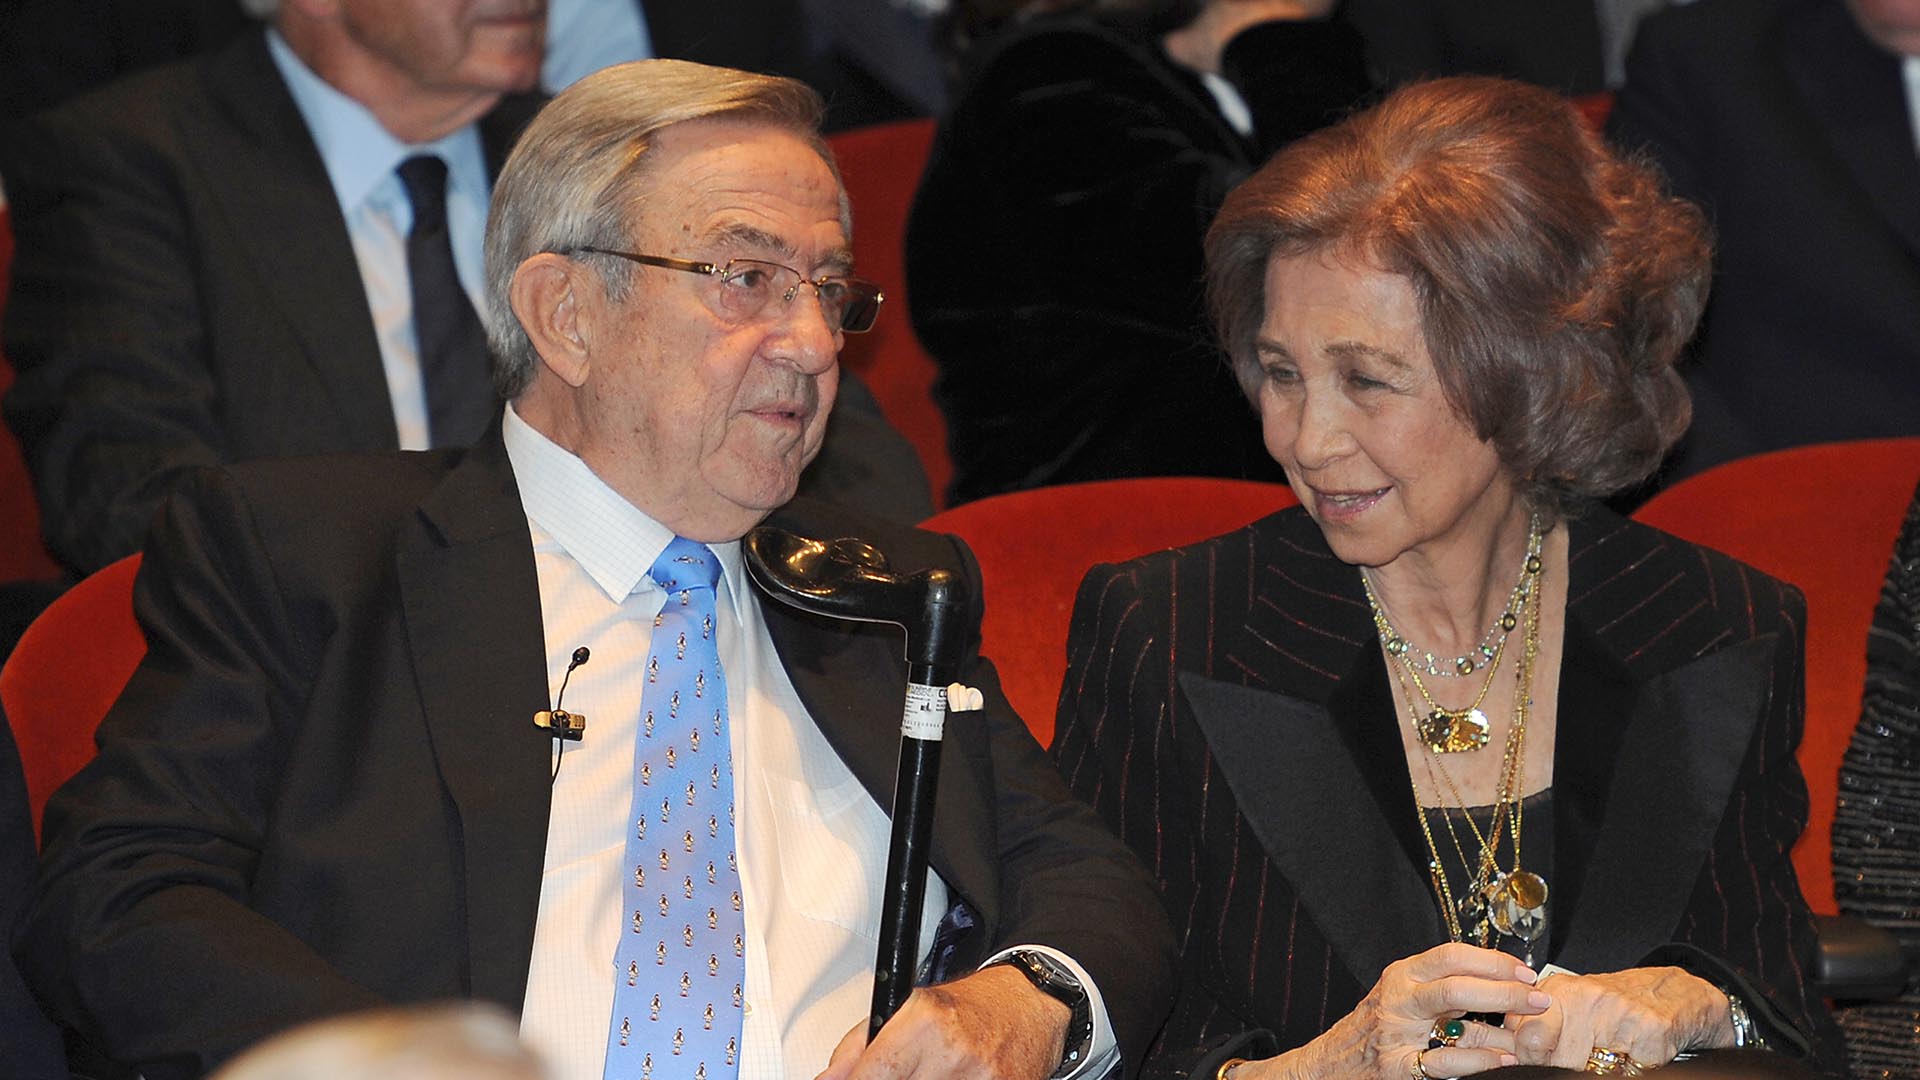 Queen Sofia of Spain and King Constantin of Greece attending the screening of a documentary film honoring the 50th anniversary of the King Pablo¿s dead in Athens, Greece, on March 5th, 2014